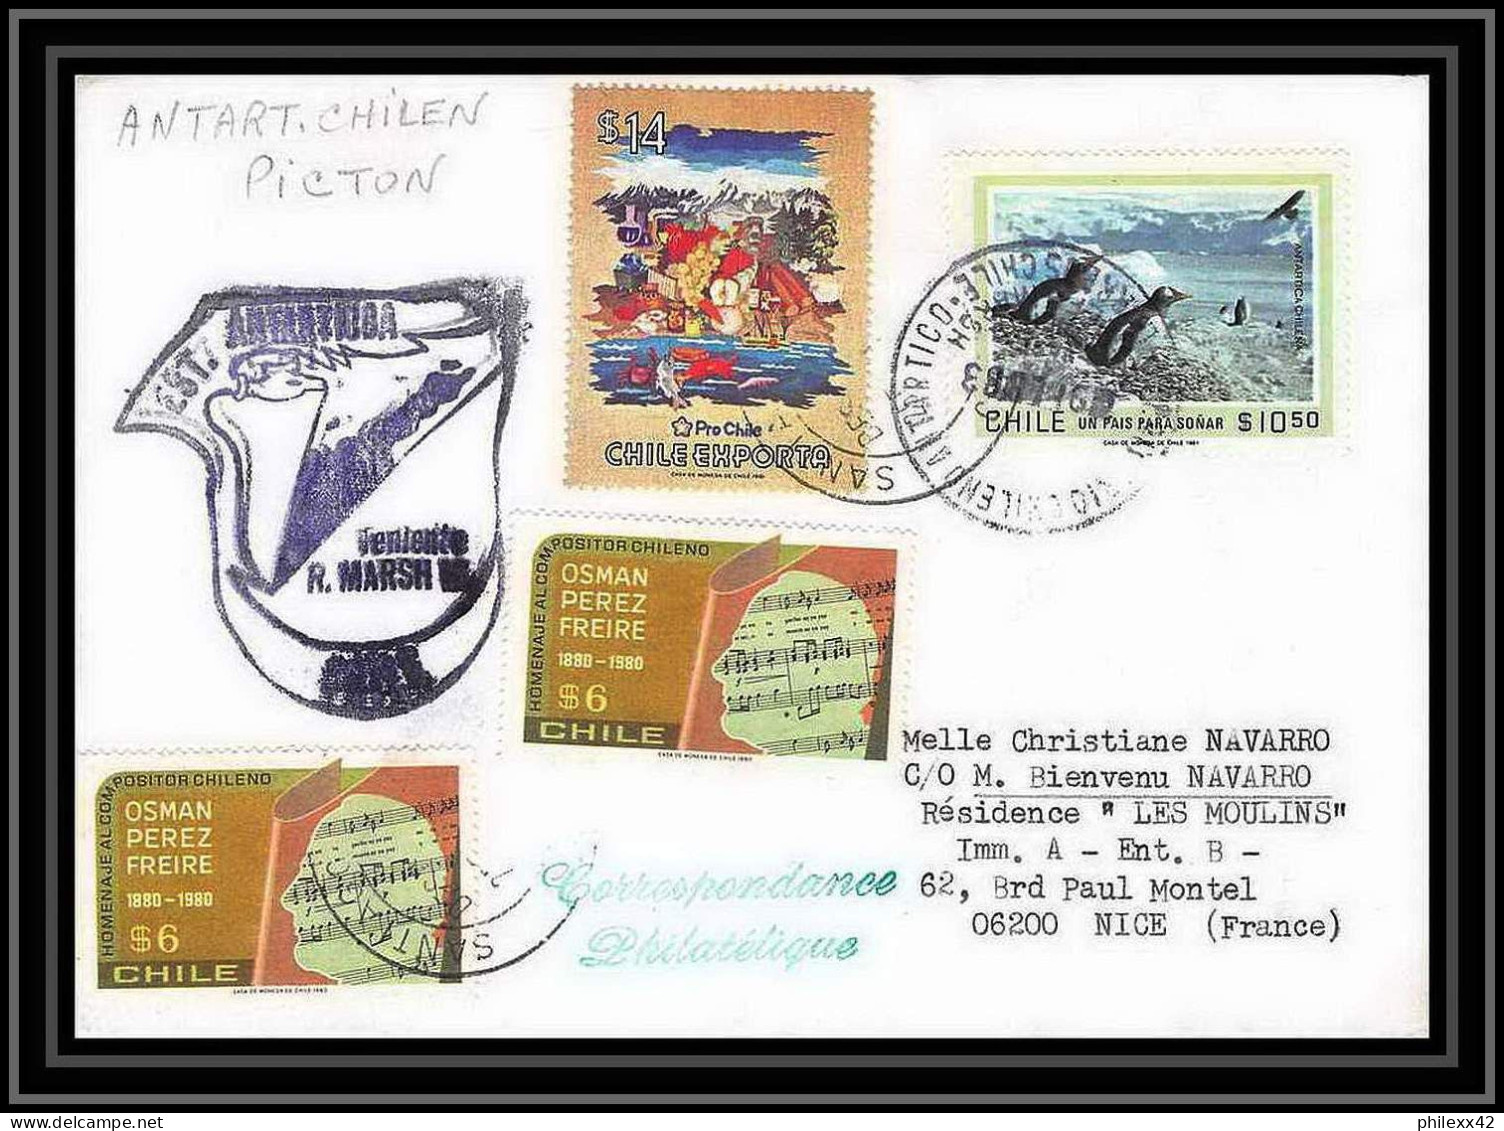 1916 Antarctic Chili (chile) Lettre (cover) Picton 9/2/1983  - Forschungsstationen